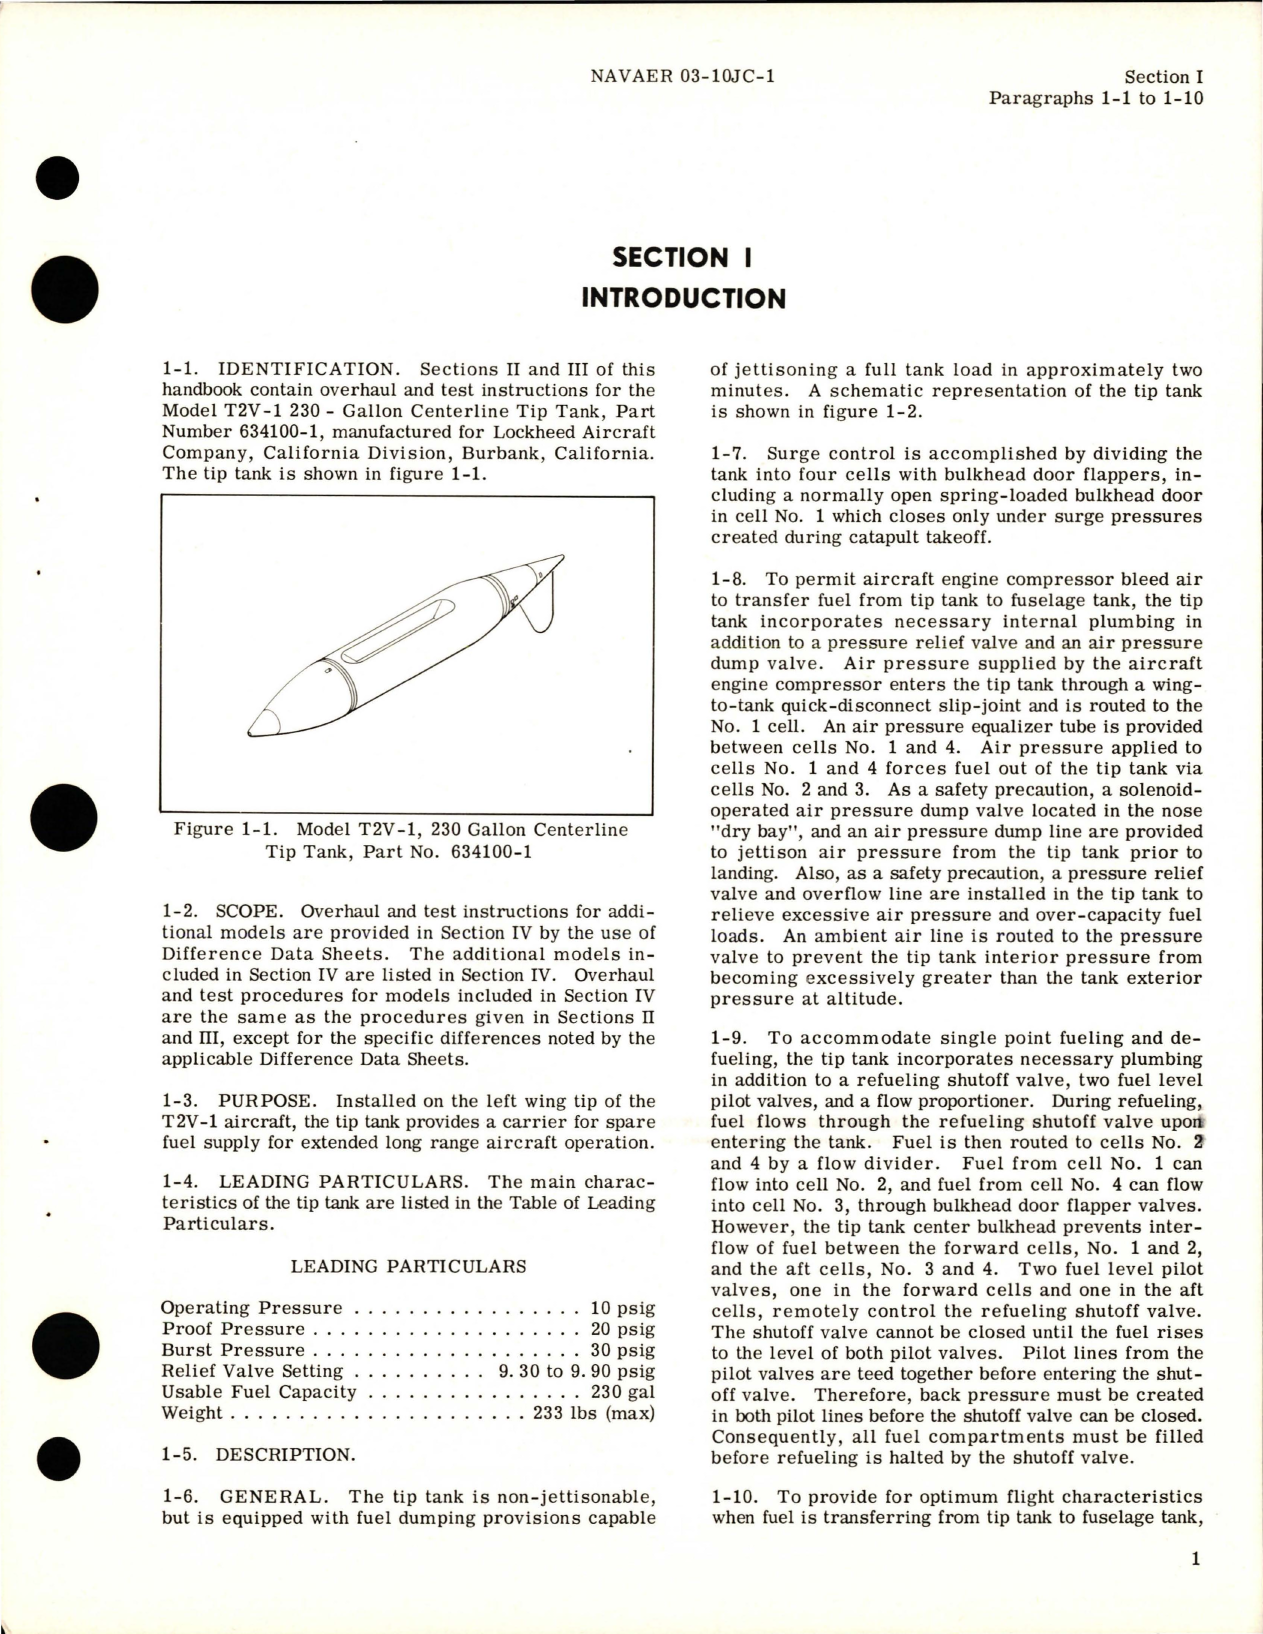 Sample page 5 from AirCorps Library document: Overhaul Instructions - Centerline Tip Tank - Model T2V-1 - 230 Gallon - Part 634100-1 and 634100-2